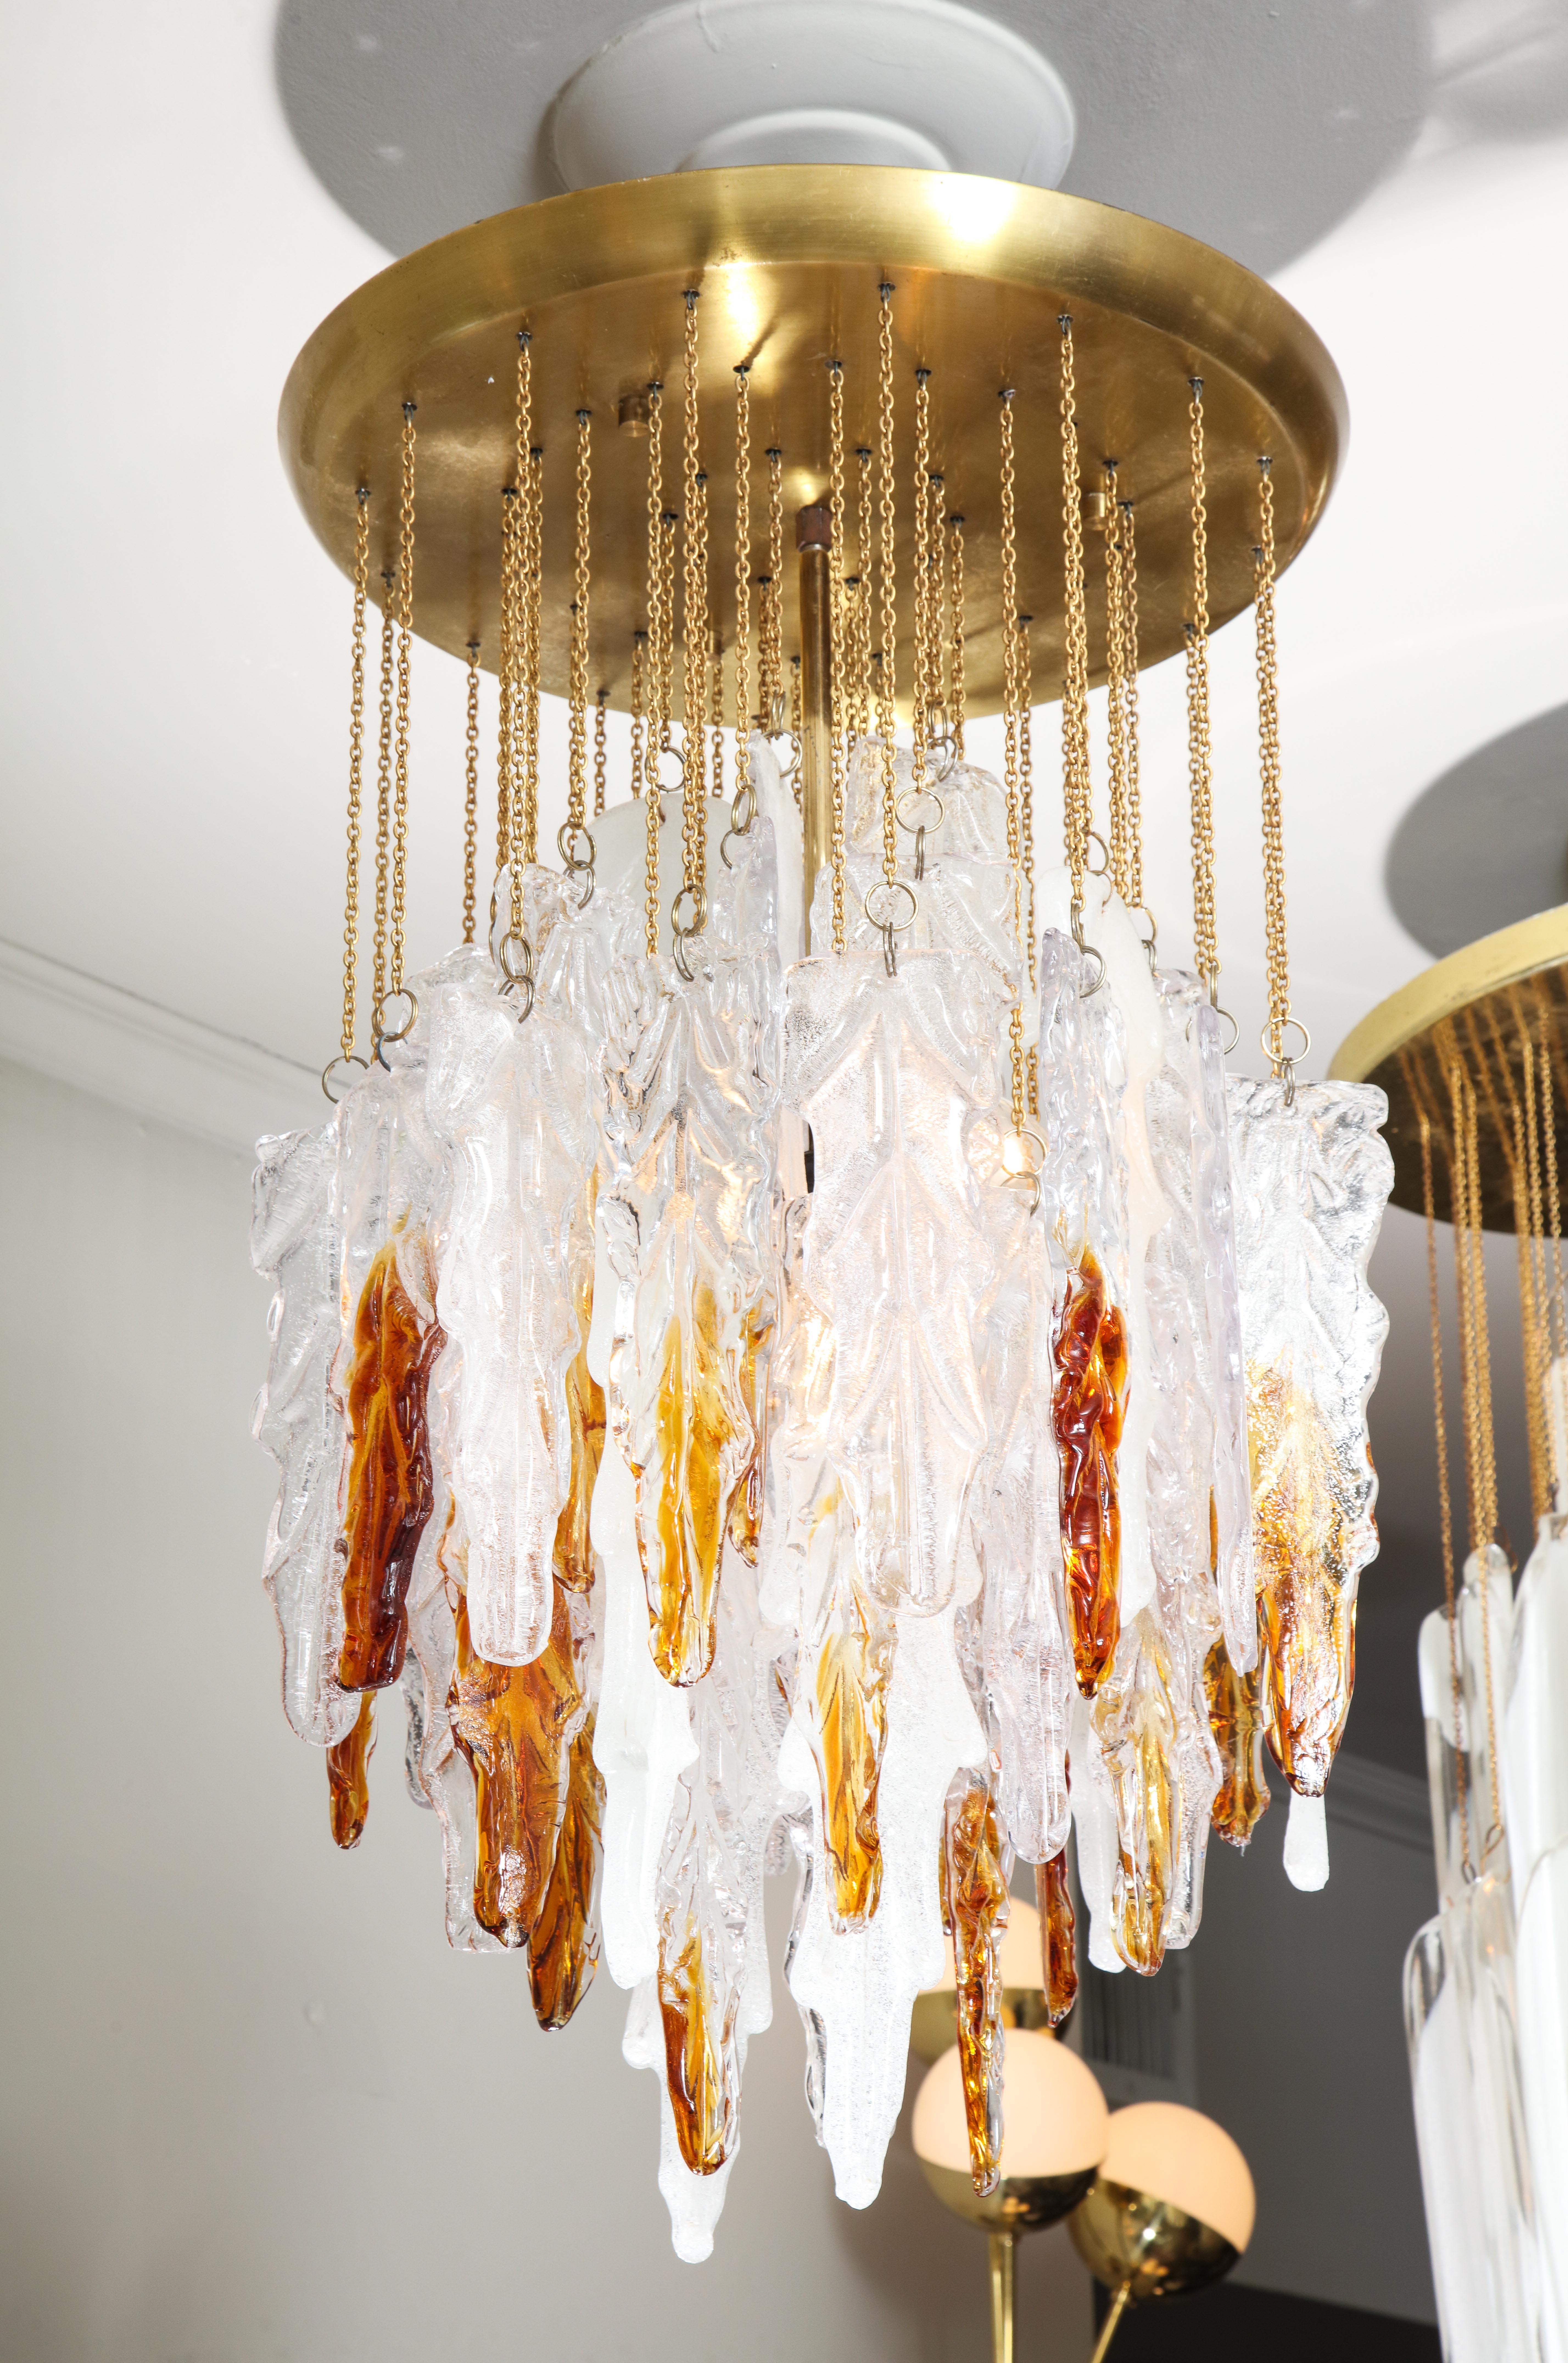 Unusual vintage Poliarte leaf glass chandelier, designed by Alabano Poli in 1970's. The chandelier has a combination of clear, frost and amber colored glass, creating visual variations from every angle. In good condition with minor wear consistent